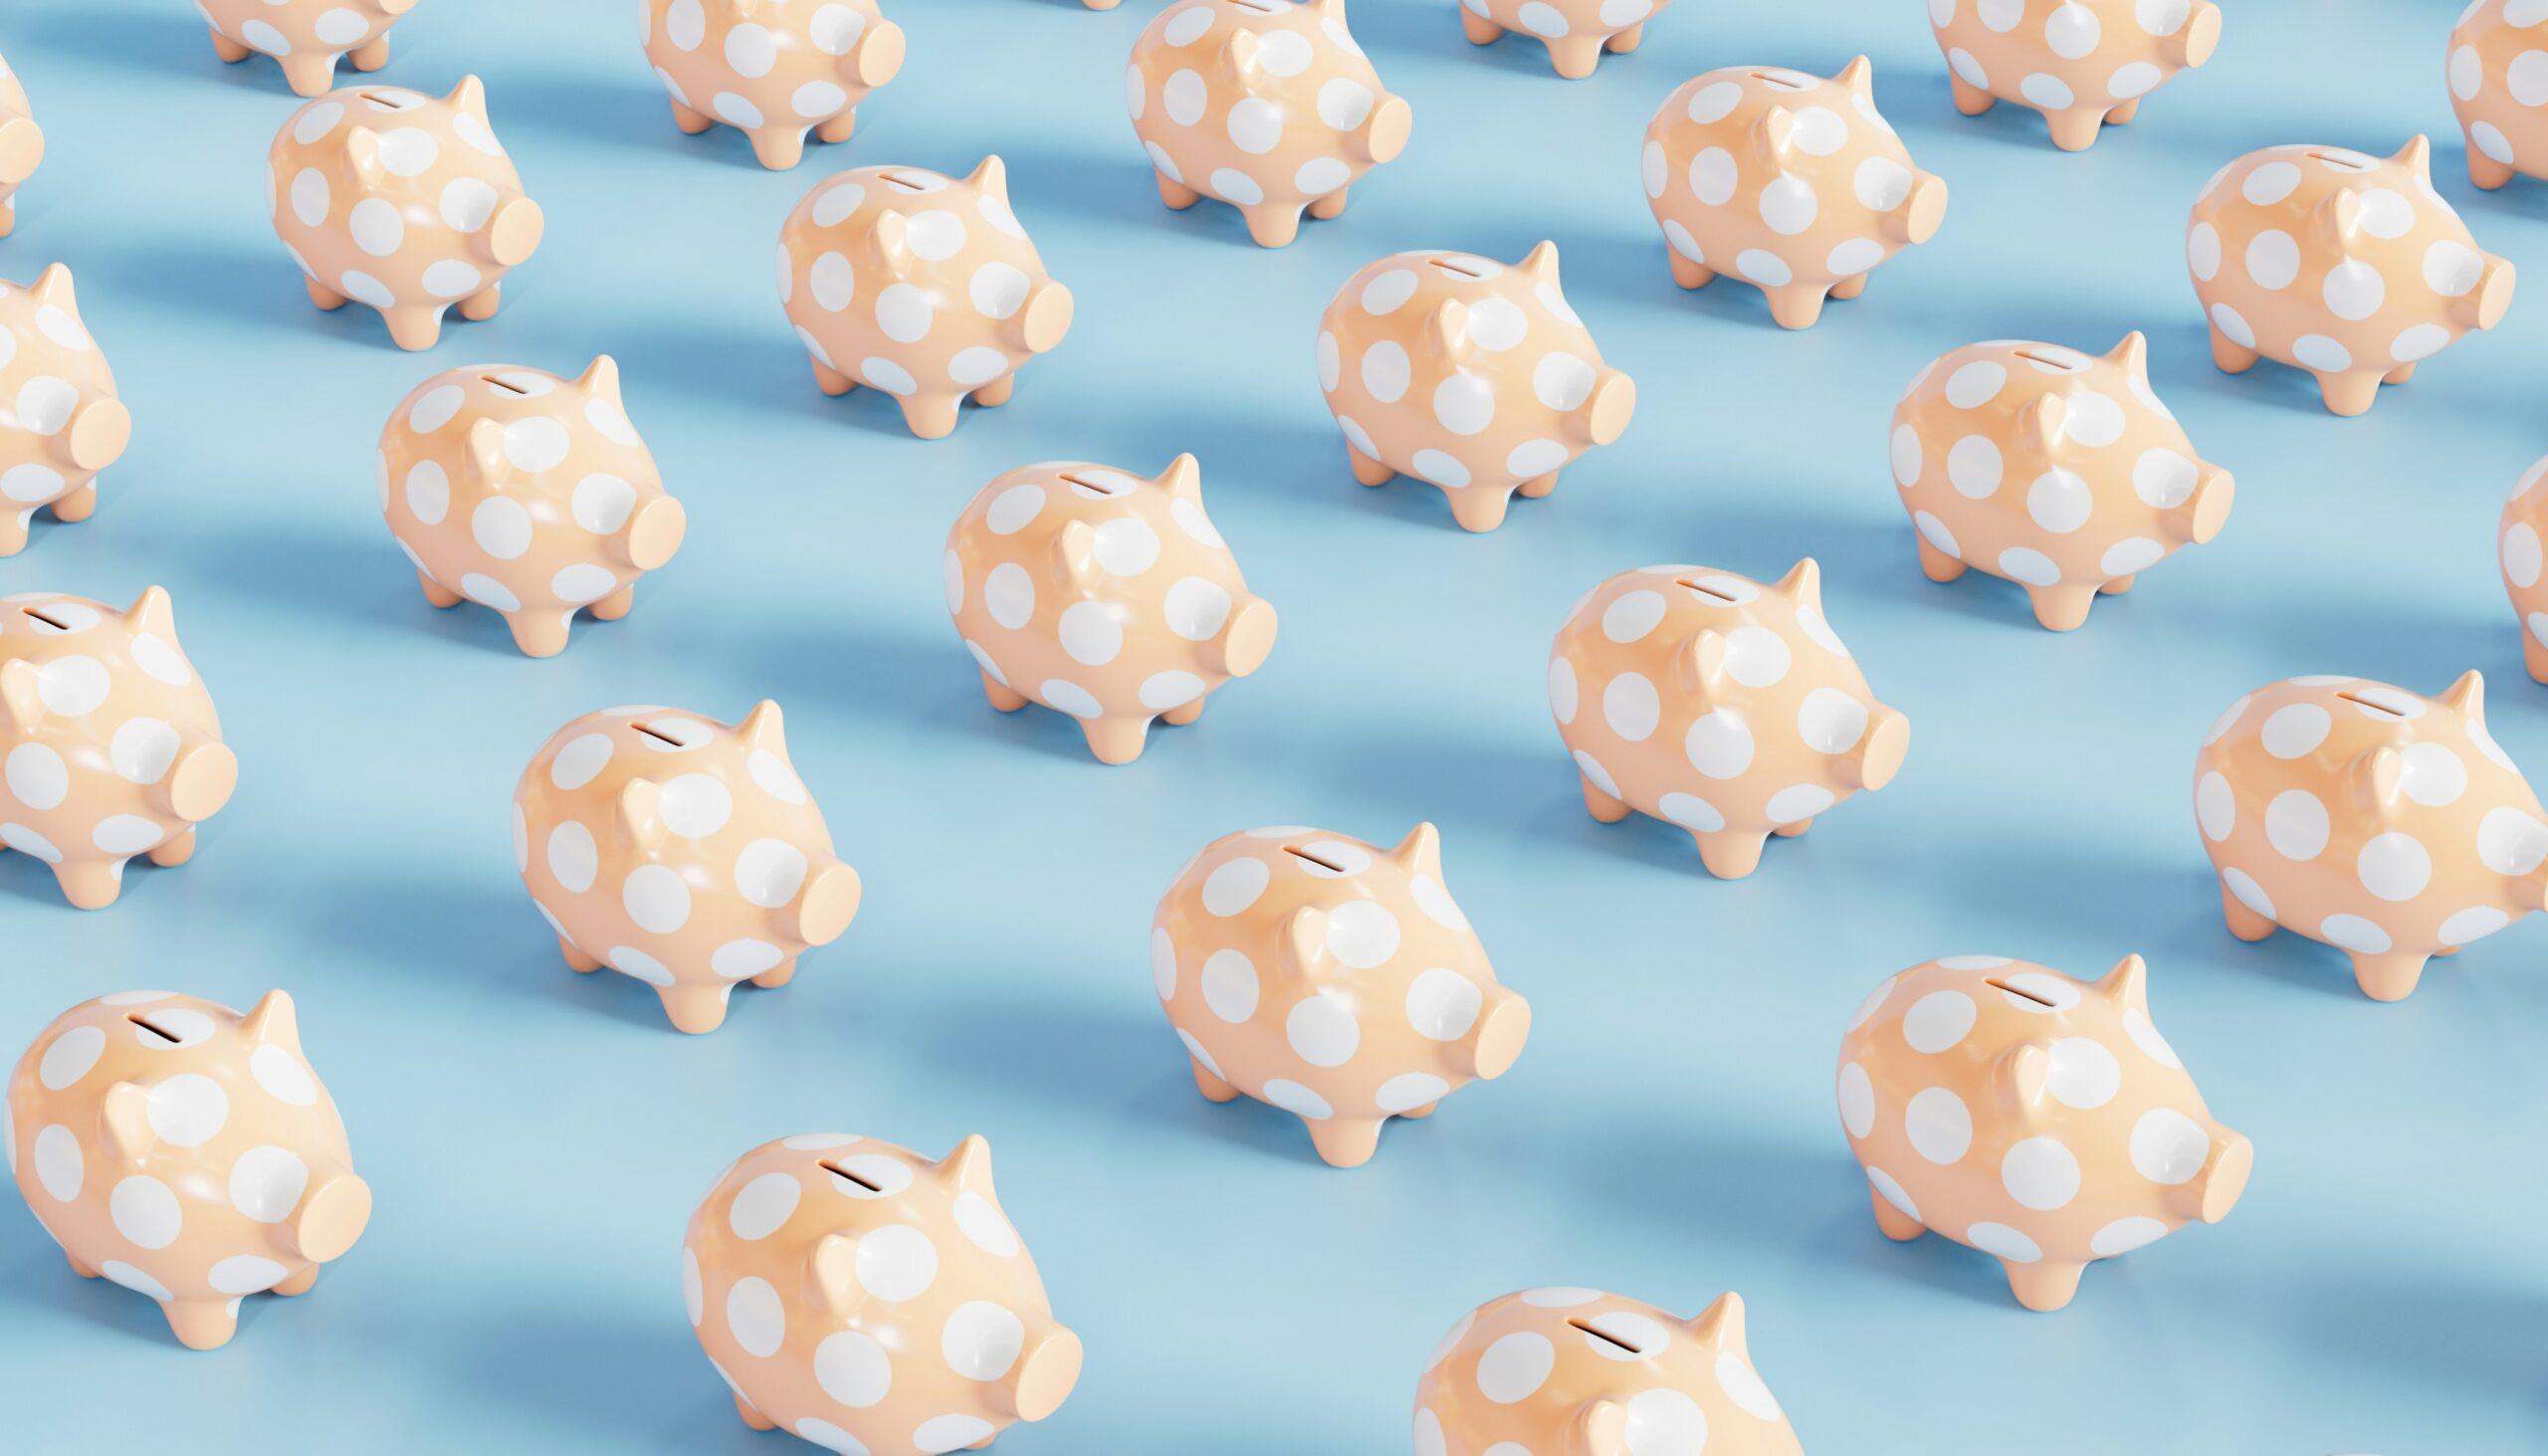 Cute spotted piggy banks on a blue background